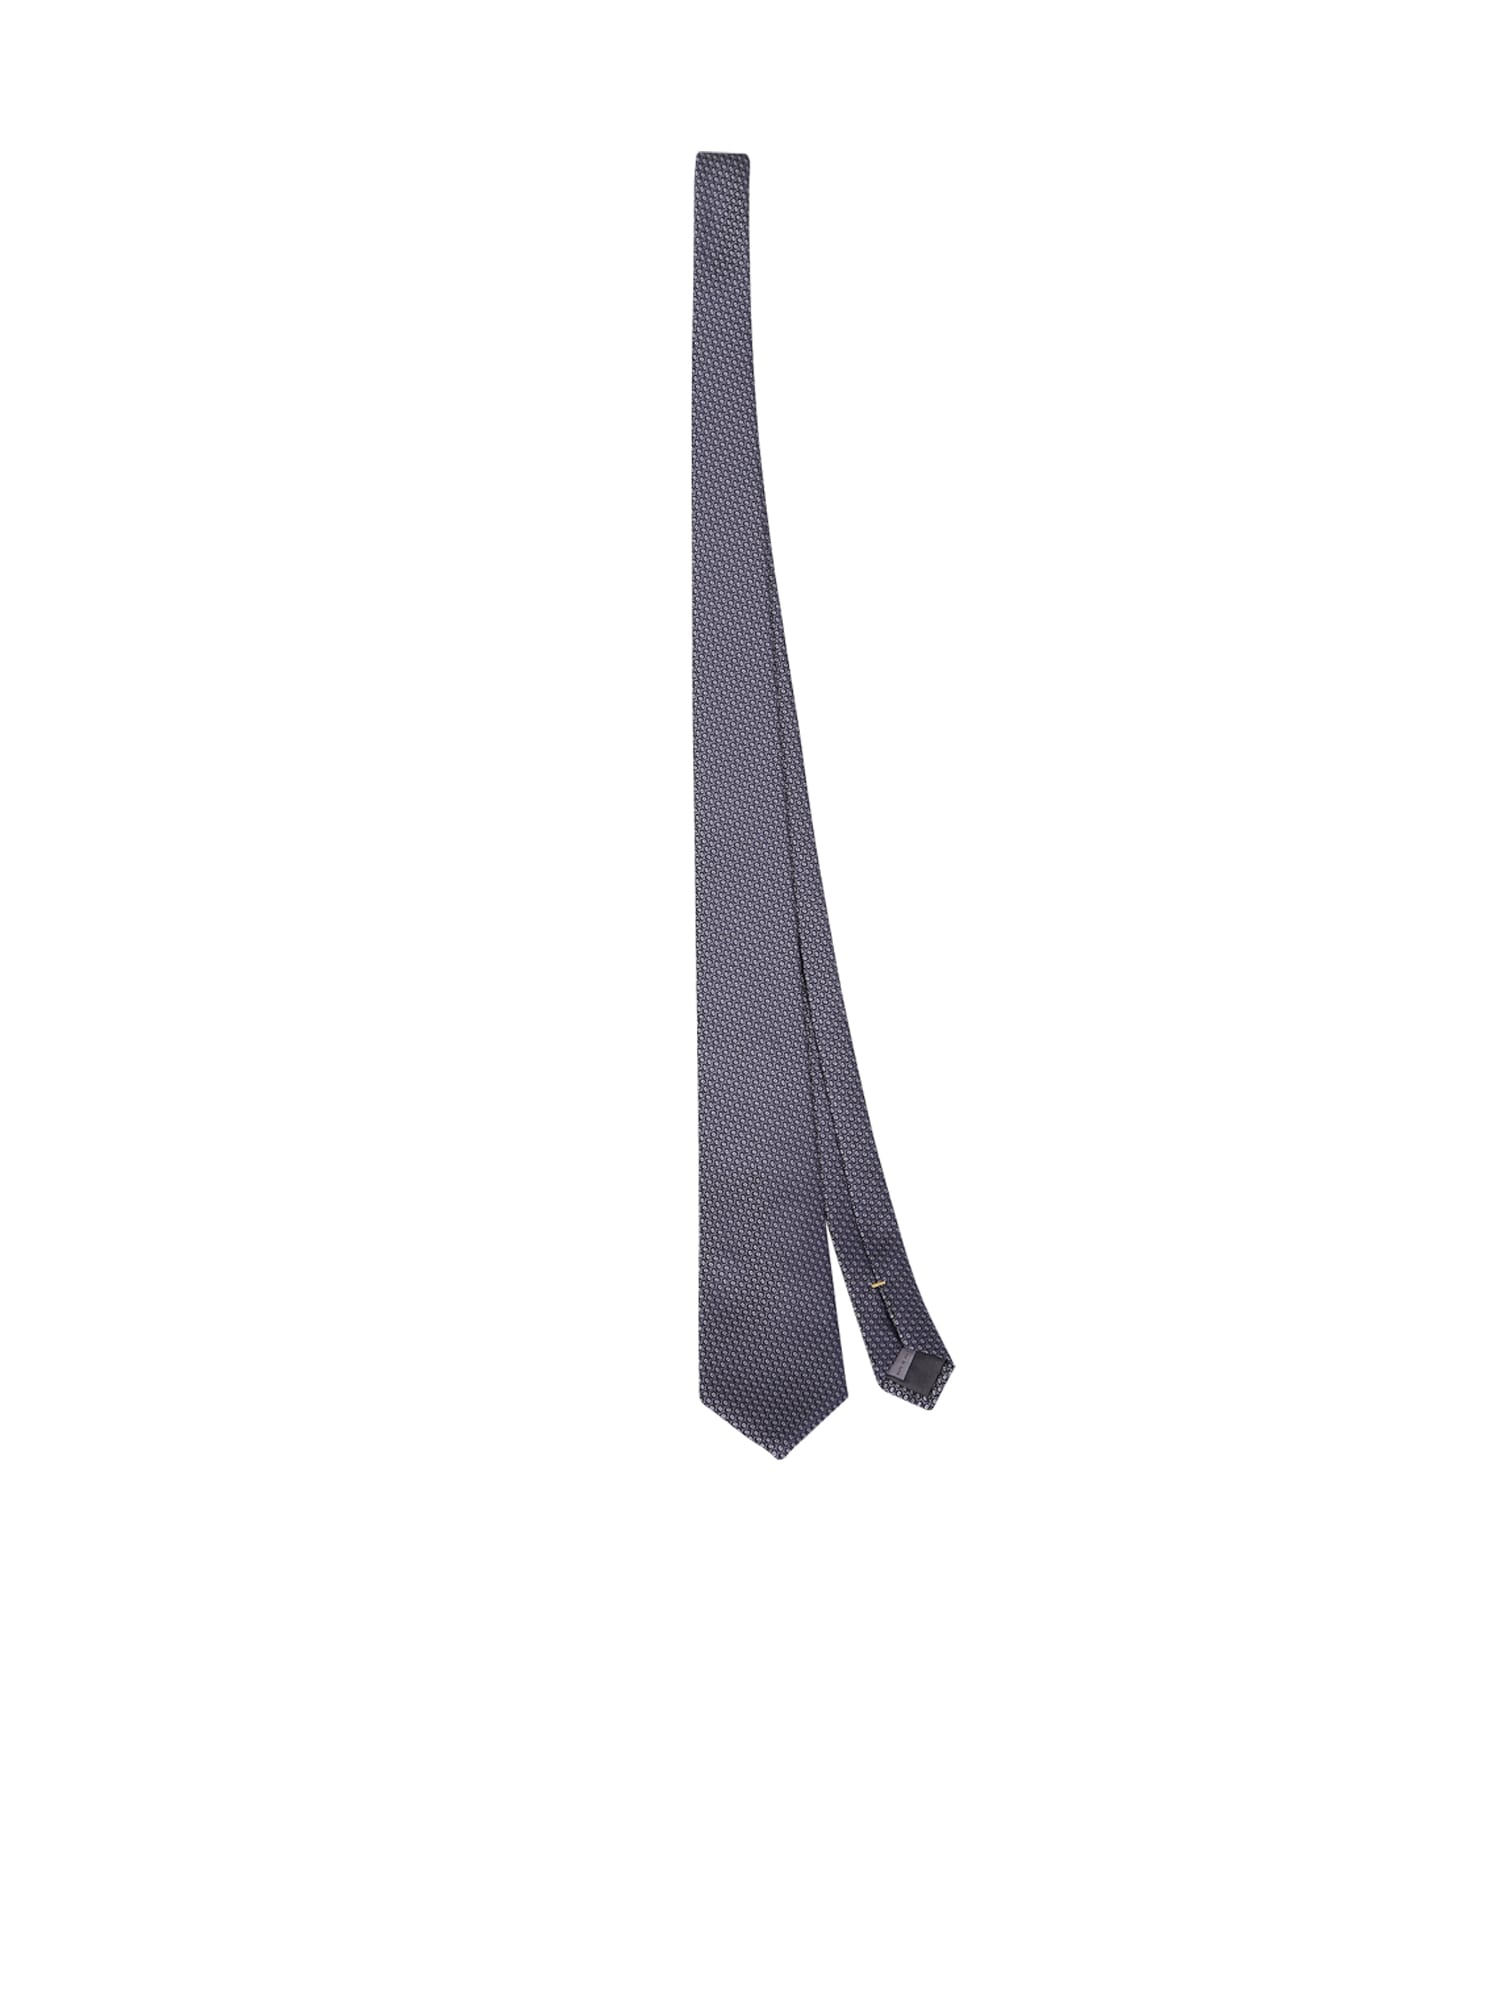 Canali Lined Tie